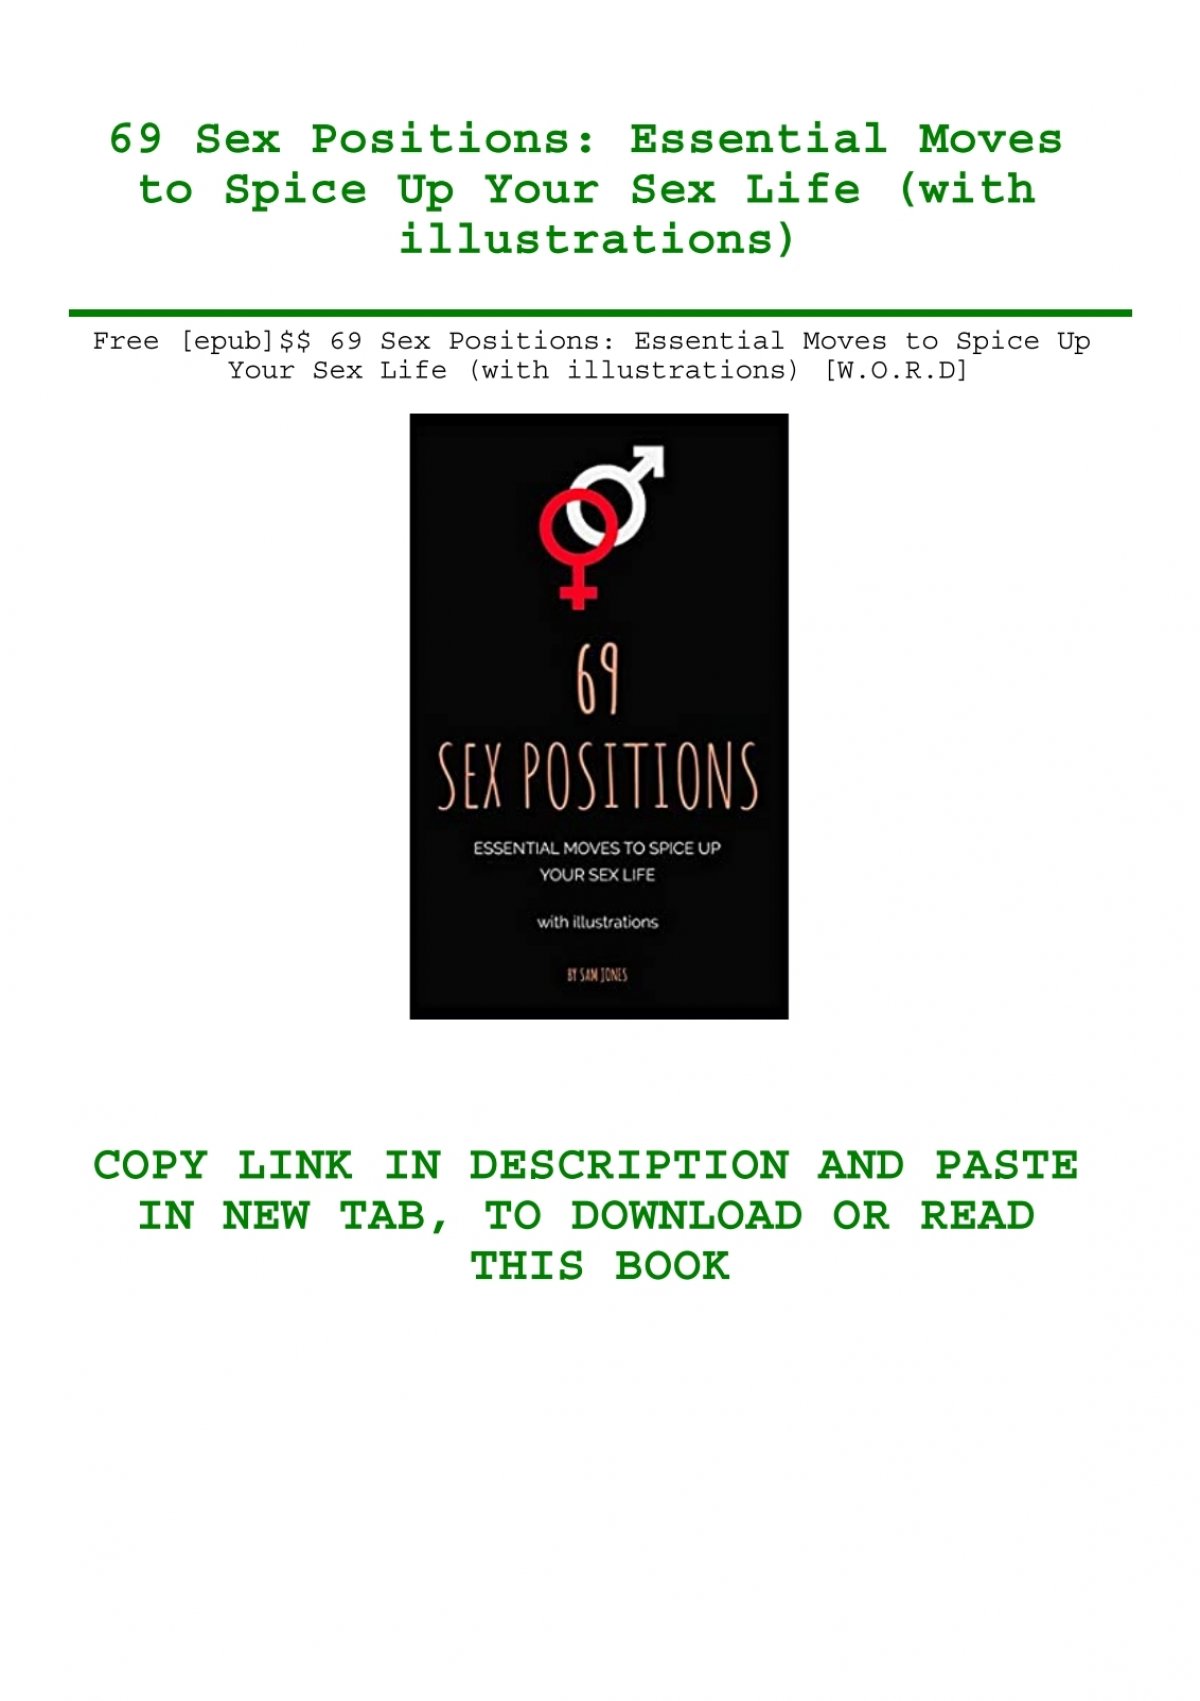 Free [epub] 69 Sex Positions Essential Moves To Spice Up Your Sex Life With Illustrations [w